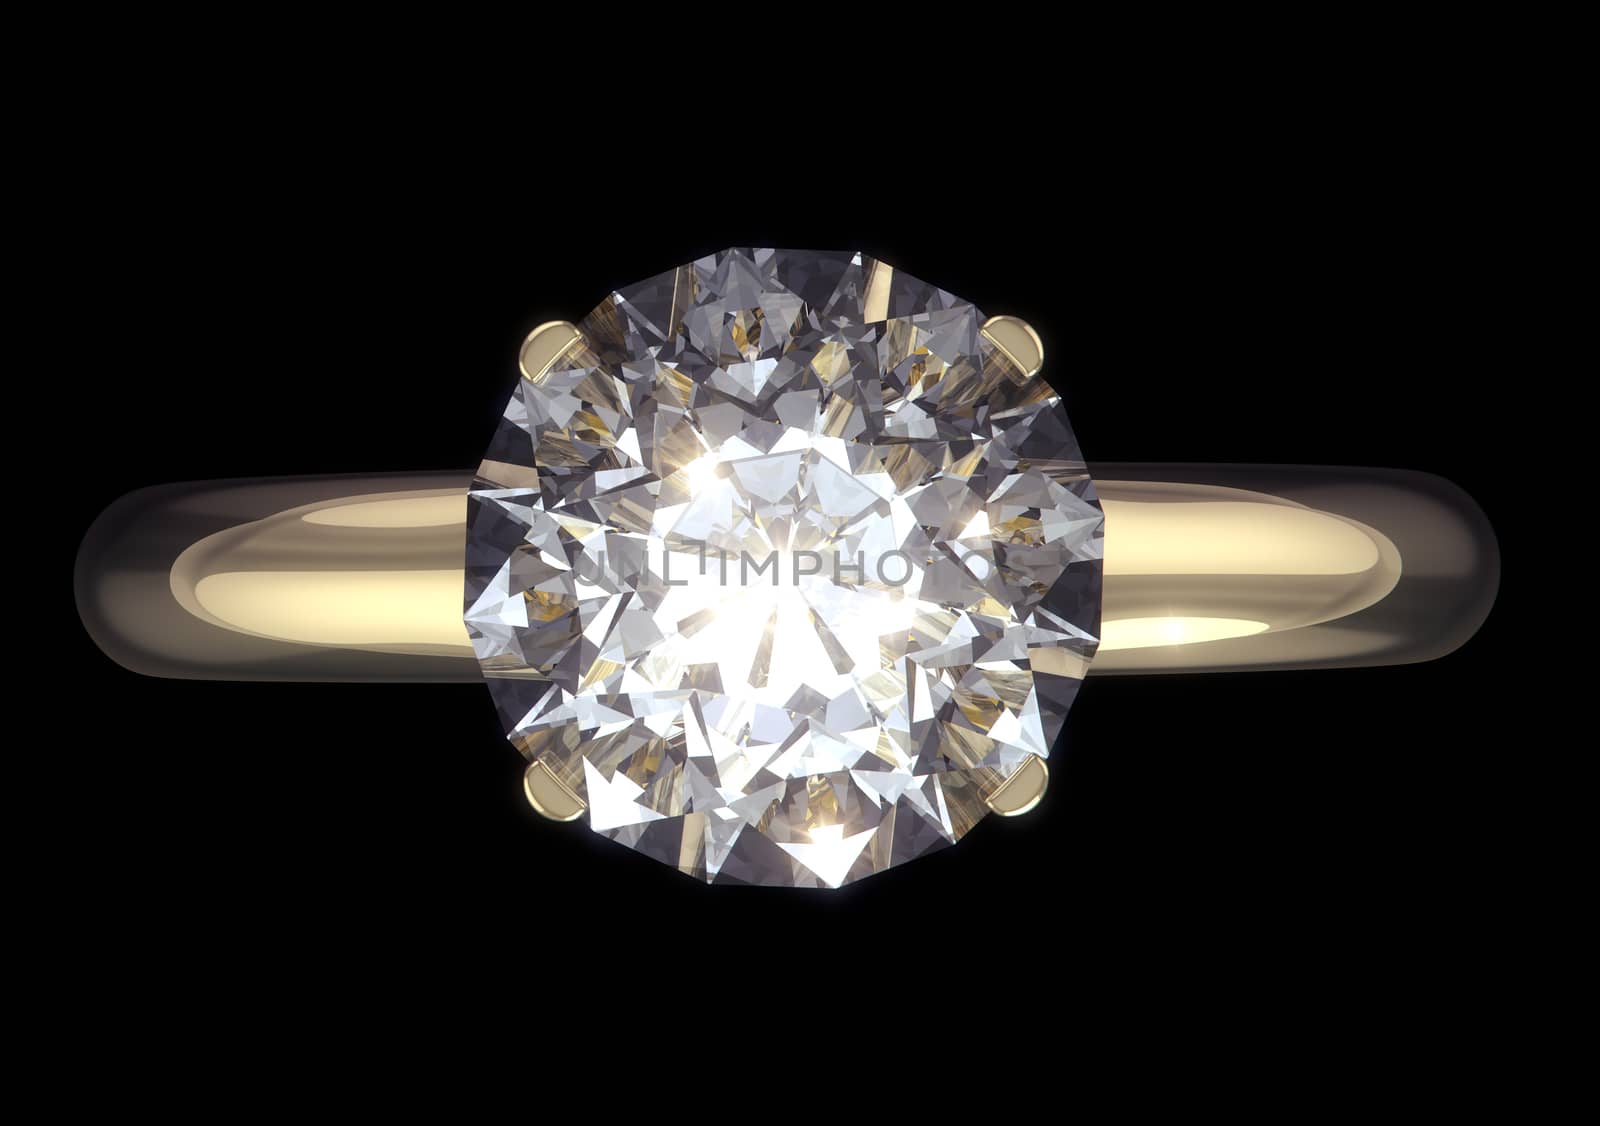 Diamond ring - isolated on black background with clipping path
 by 123dartist